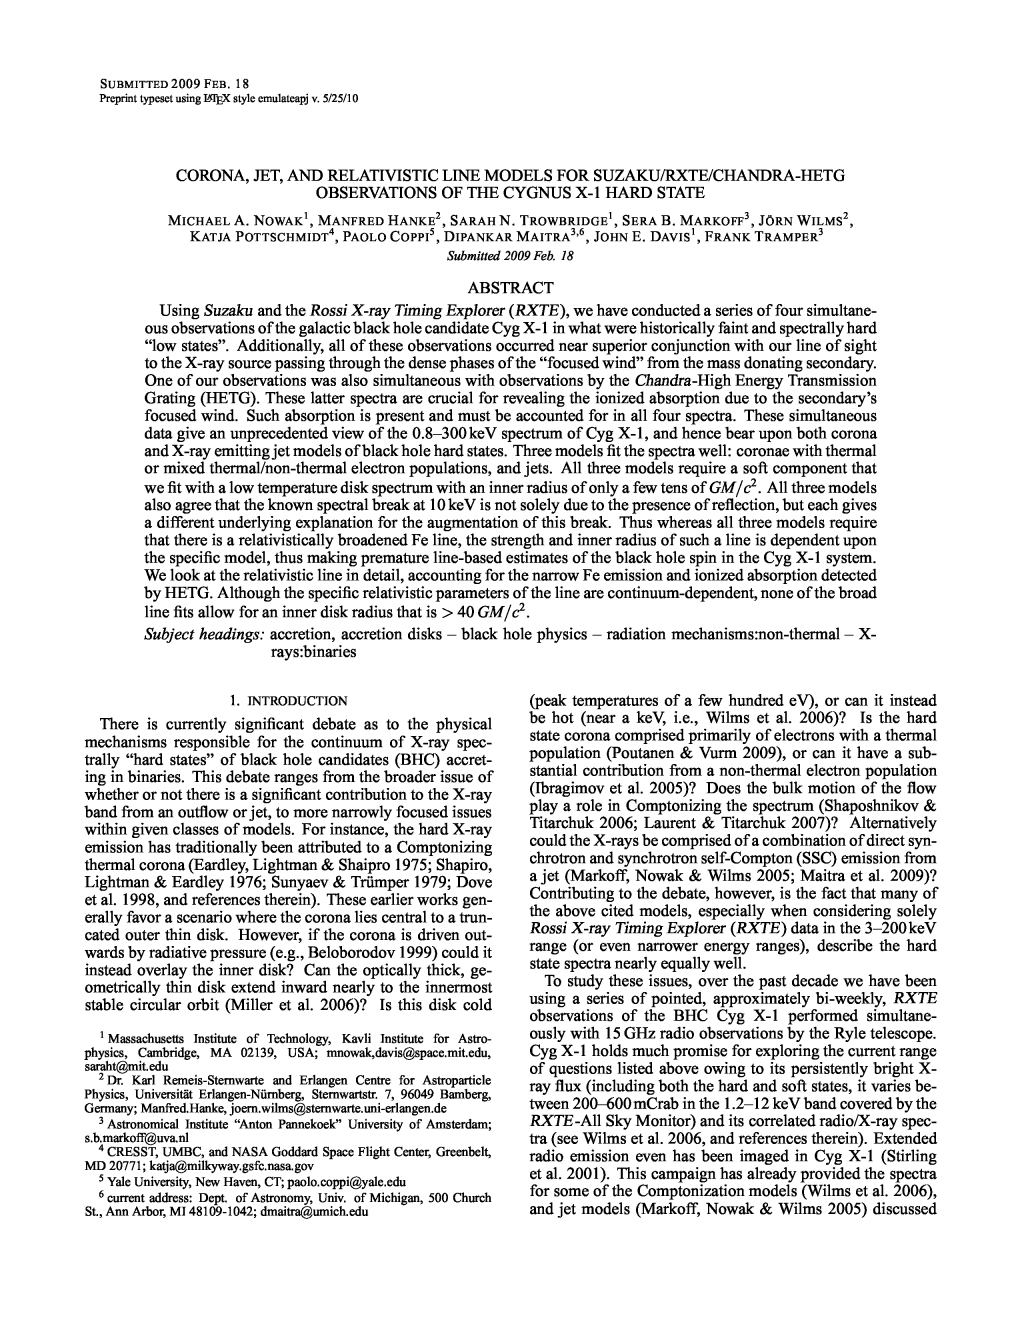 Corona, Jet, and Relativistic Line Models for Suzaku/Rxte/Chandra-Hetg Observations of the Cygnus X-1 Hard State